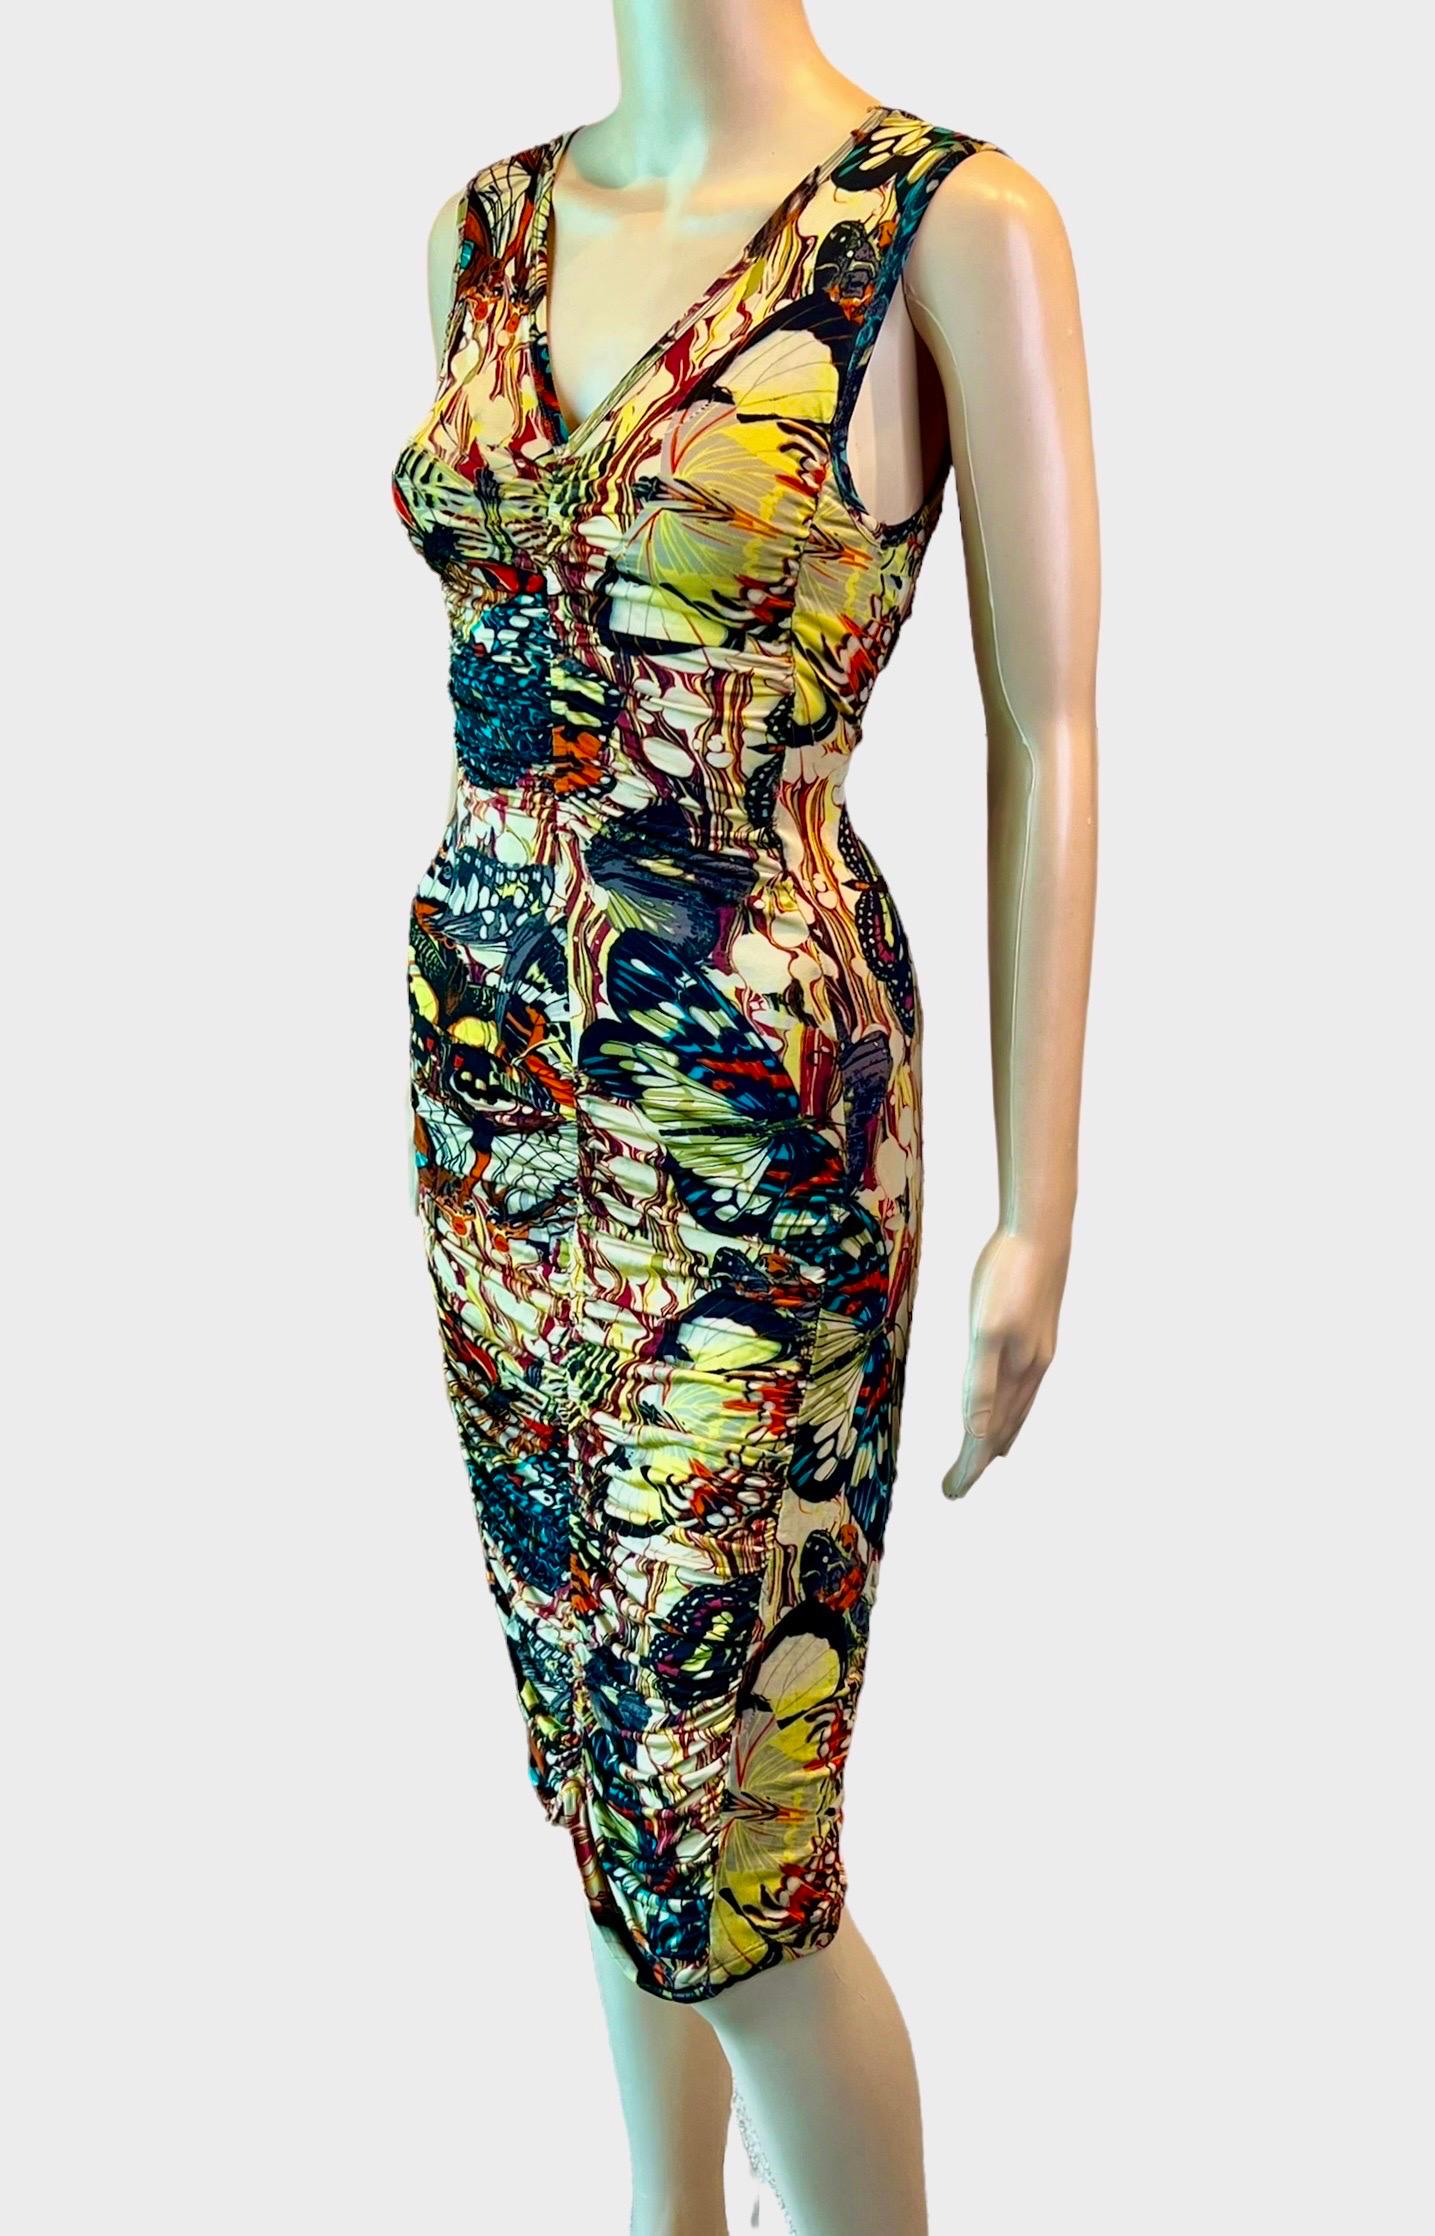 Jean Paul Gaultier Soleil S/S 2003 Butterfly Print Ruched Bodycon Mini Dress For Sale 2